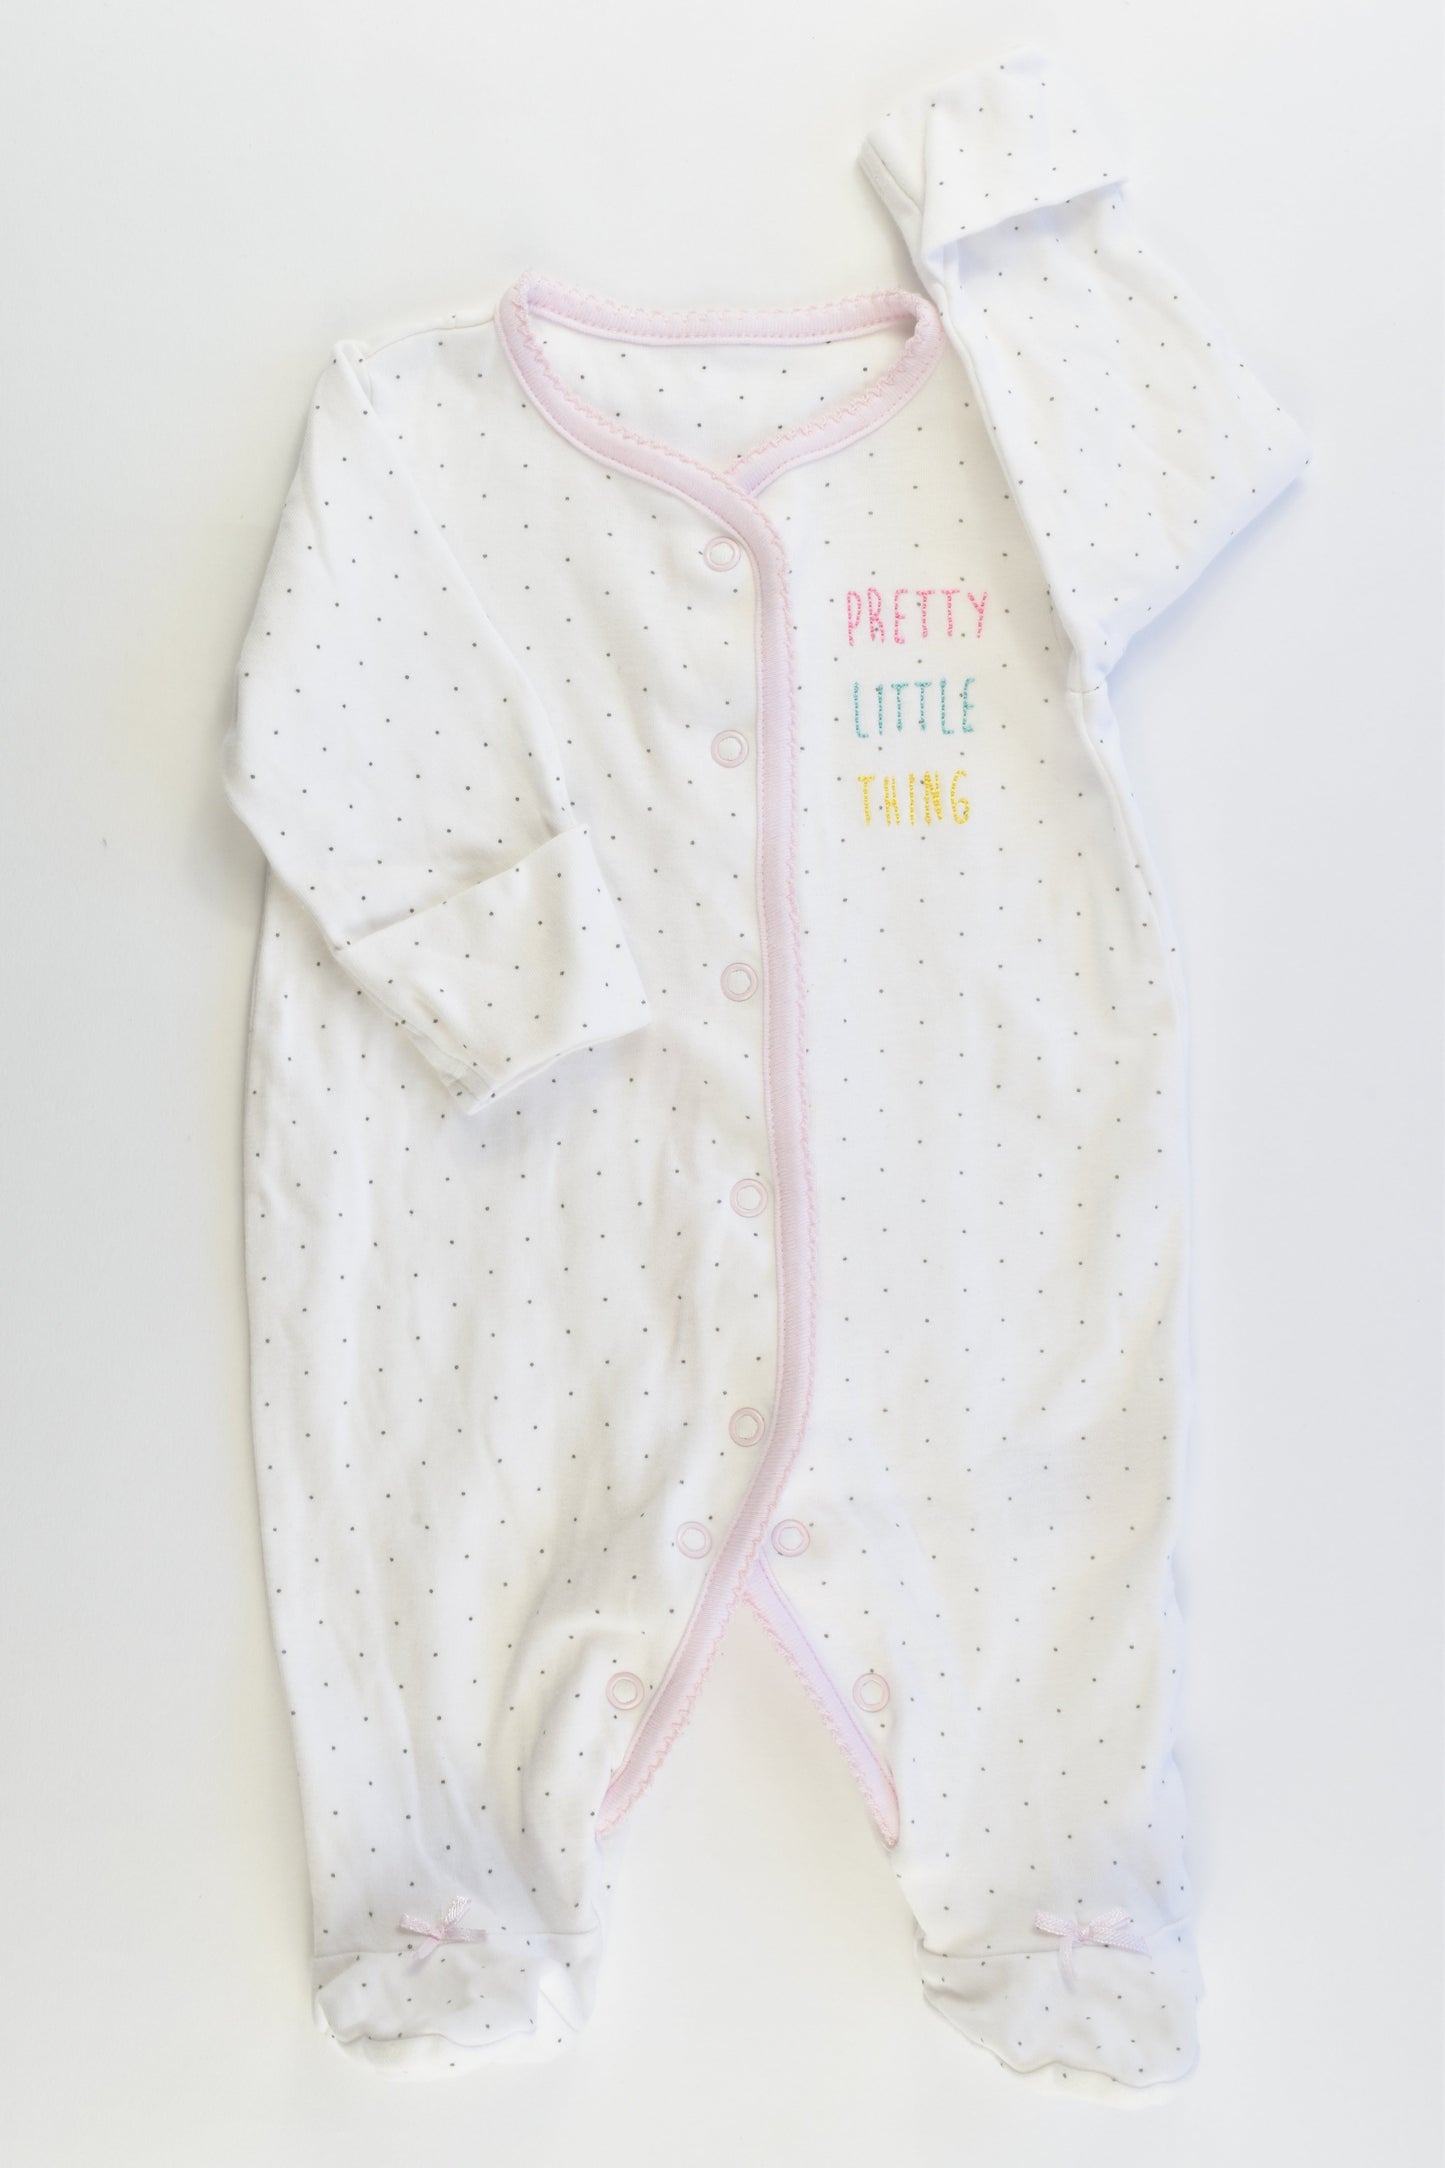 NEW Mothercare Size 000 (0-3 months) Footed 'Pretty Little Thing' Romper